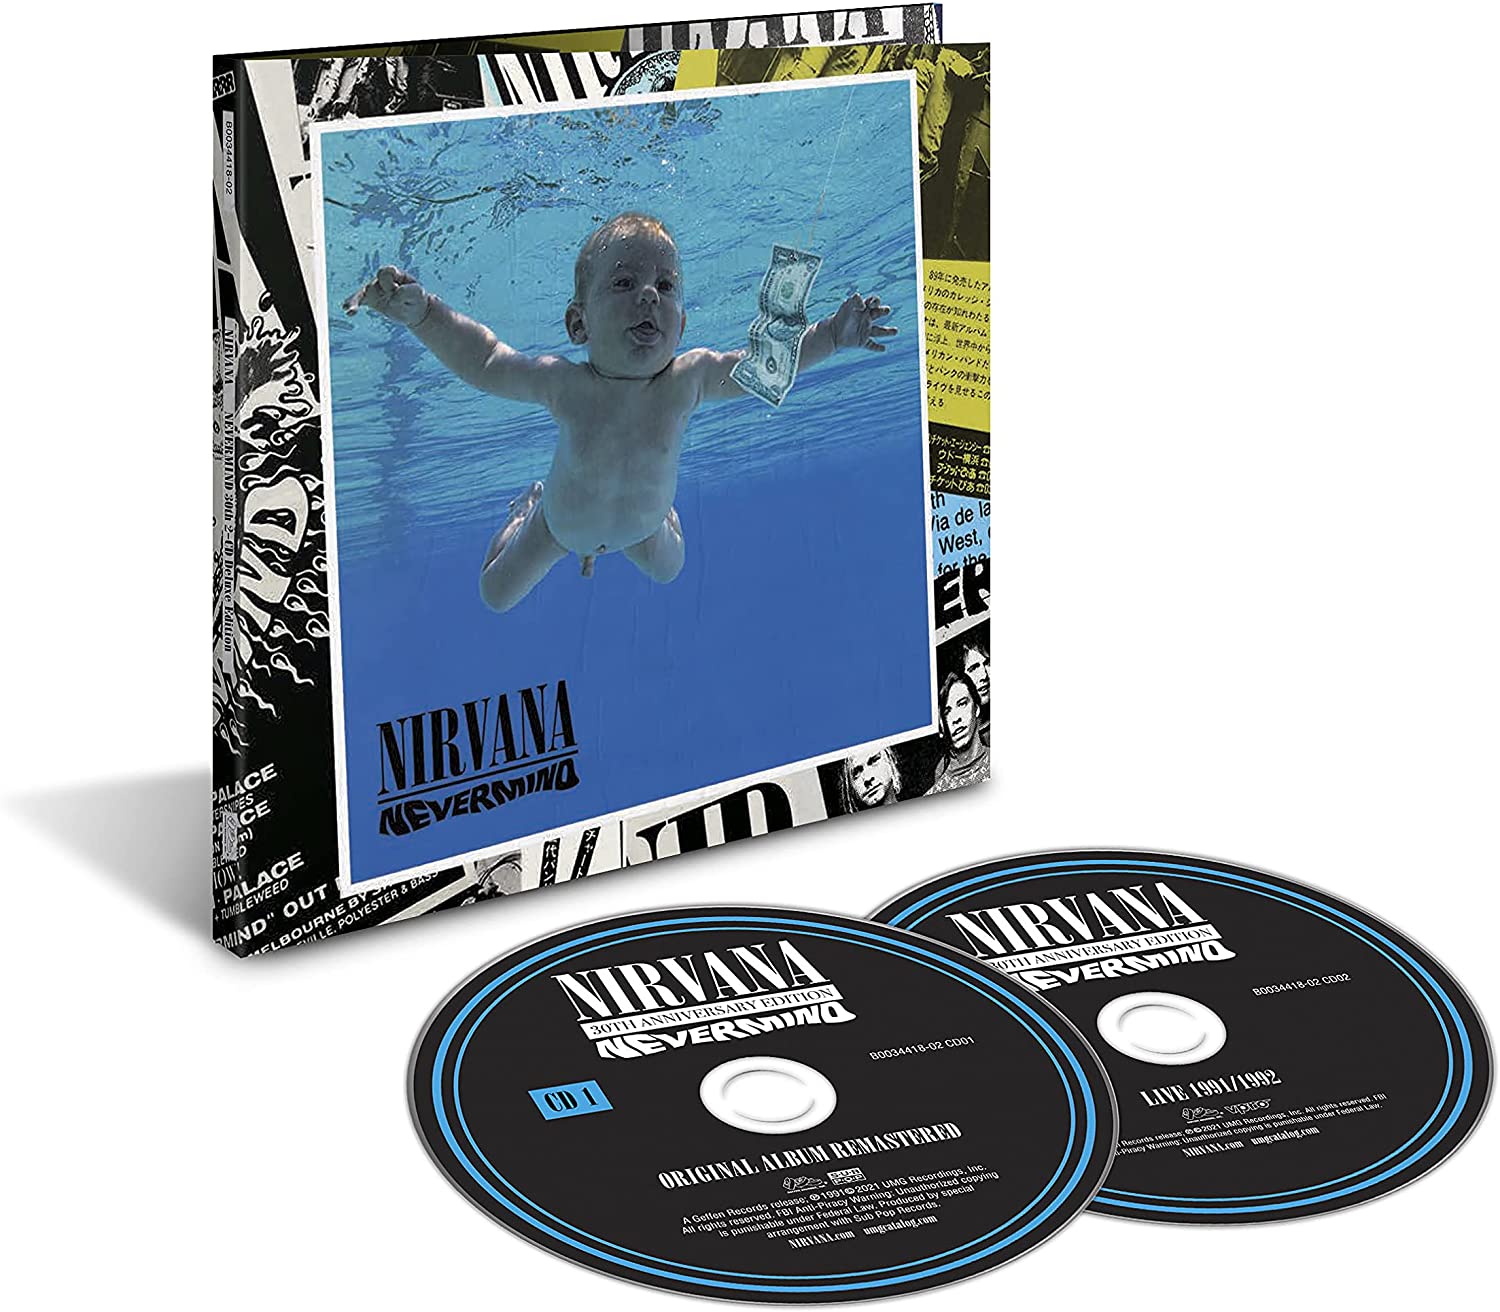 NIRVANA NEVERMIND 30th ANNIVERSARY EDITIONS RELEASED